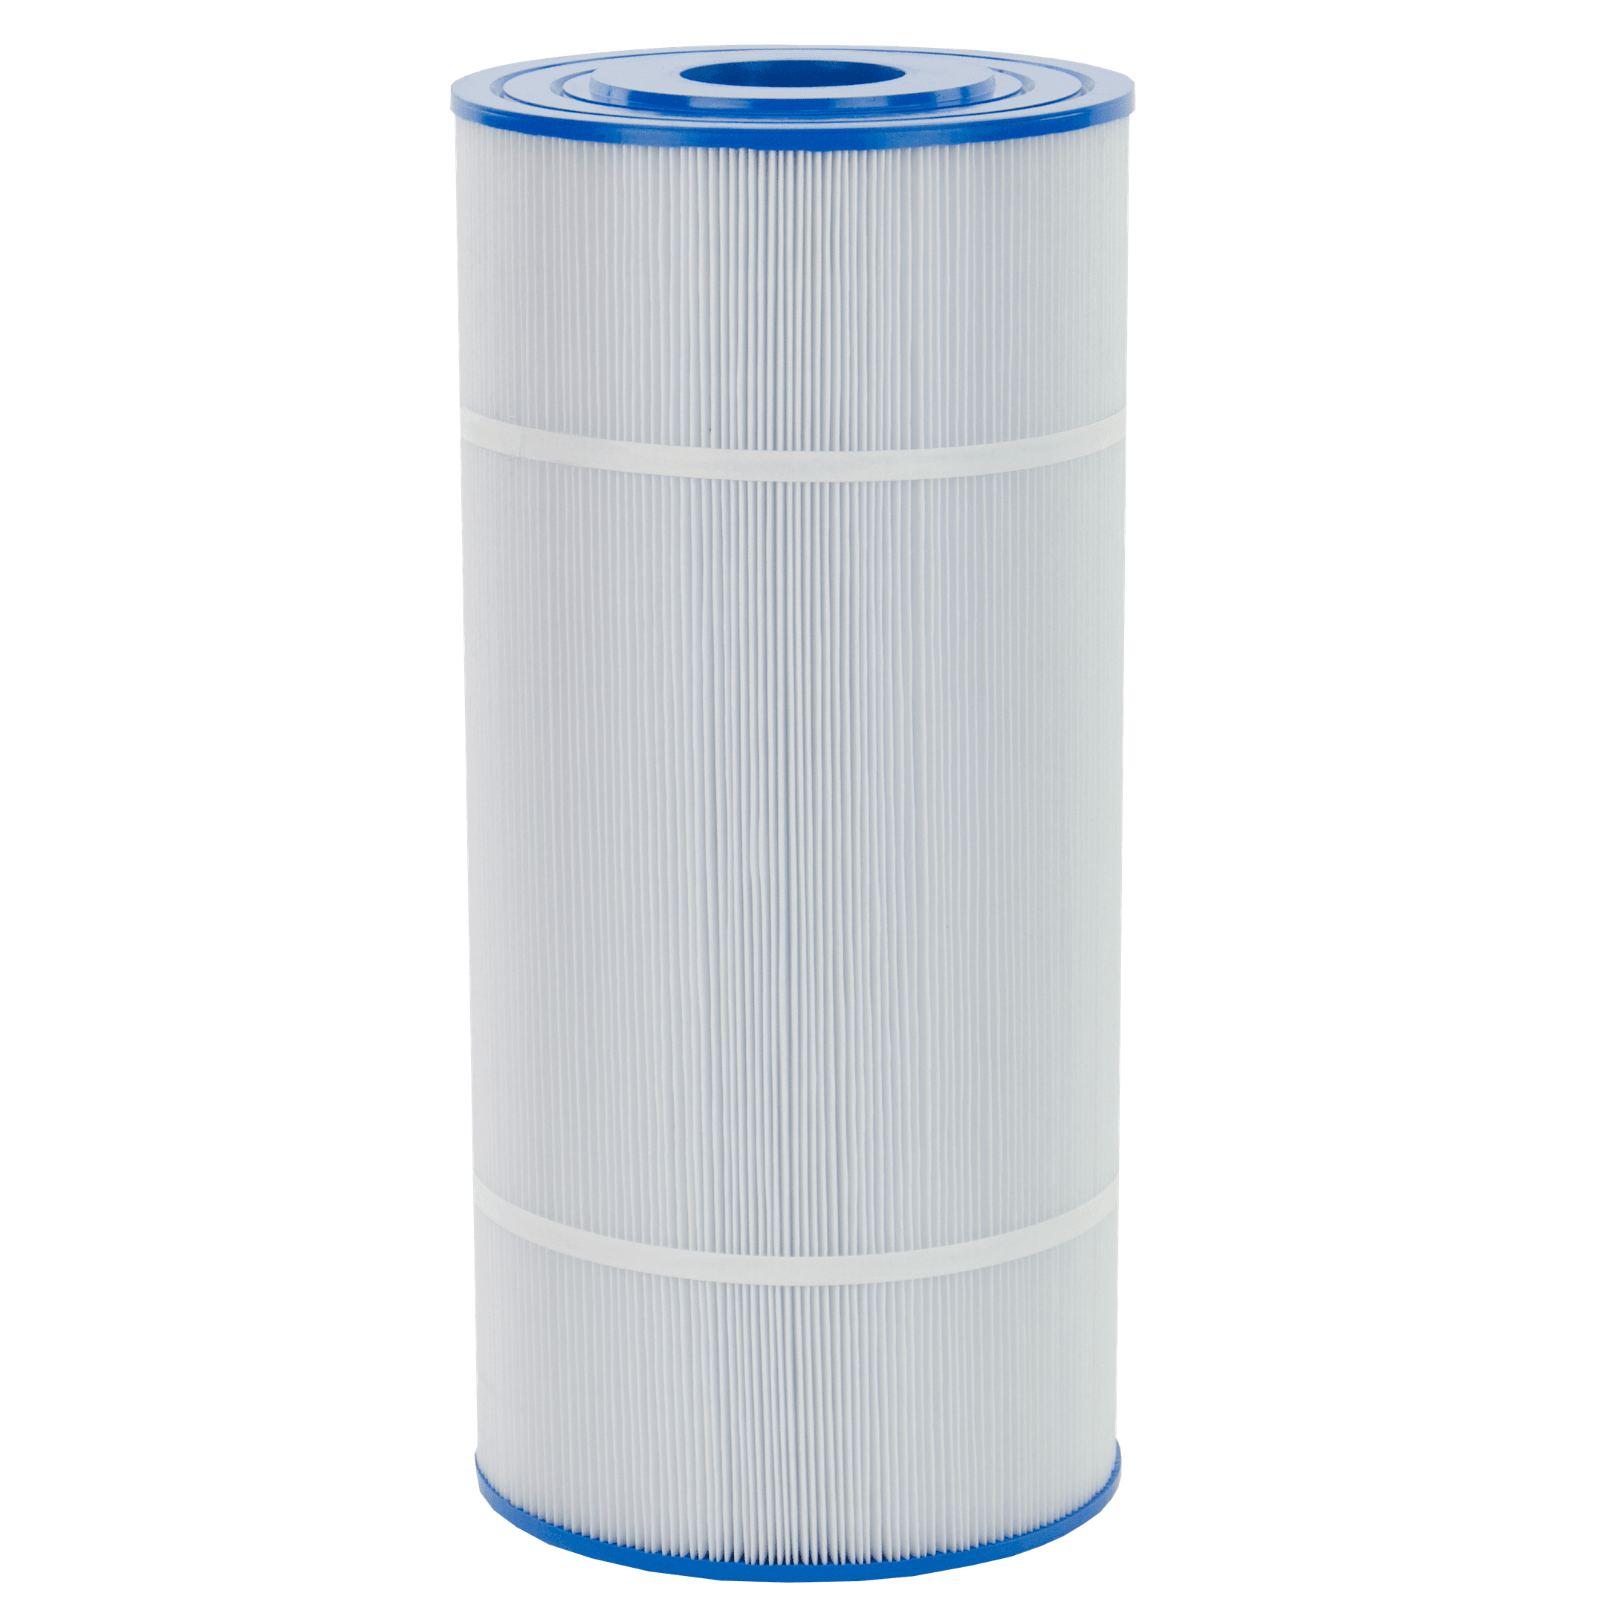 Pool Filter Cartridge Element for Astral Hurlcon ZX150 Sparesbarn